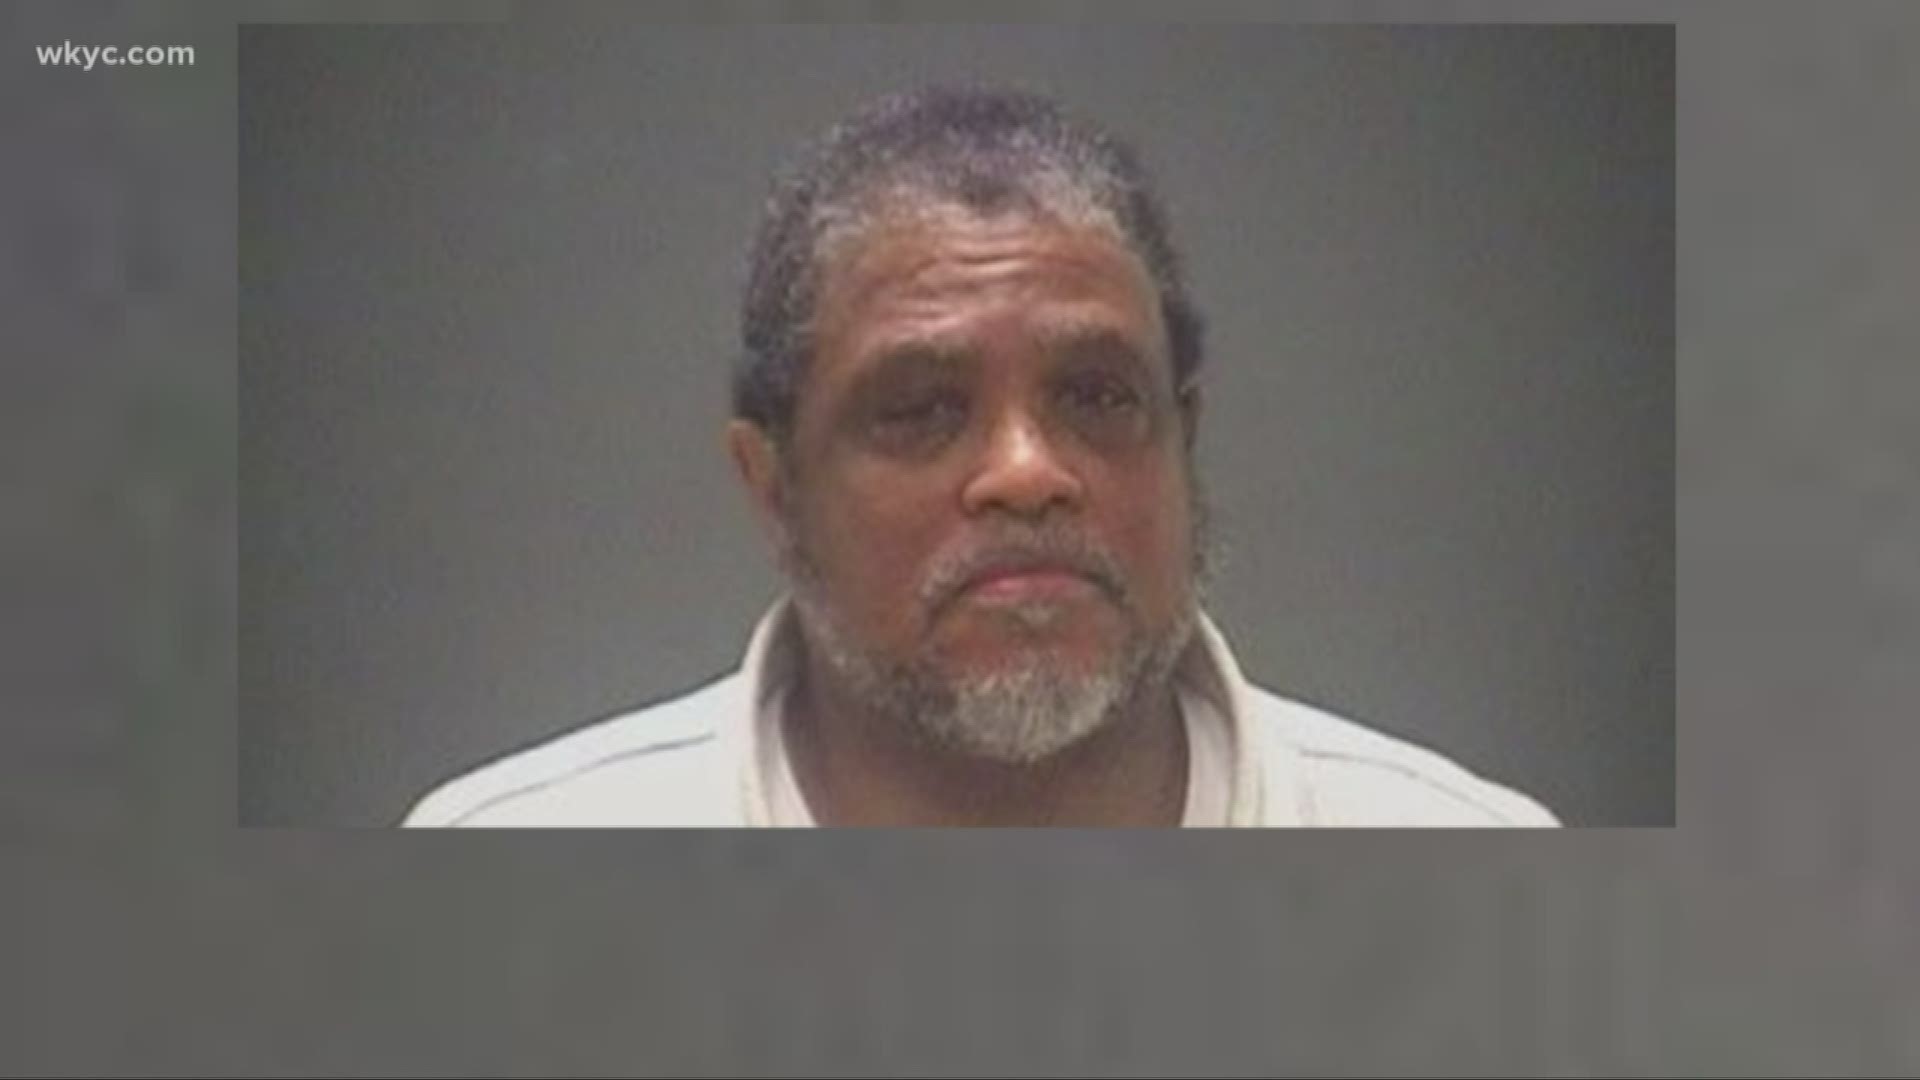 Court documents reveal Rev. Dr. Randolph Brown is accused of paying to have sex with two underage girls in 2018. One of them was apparently just 14 years old.